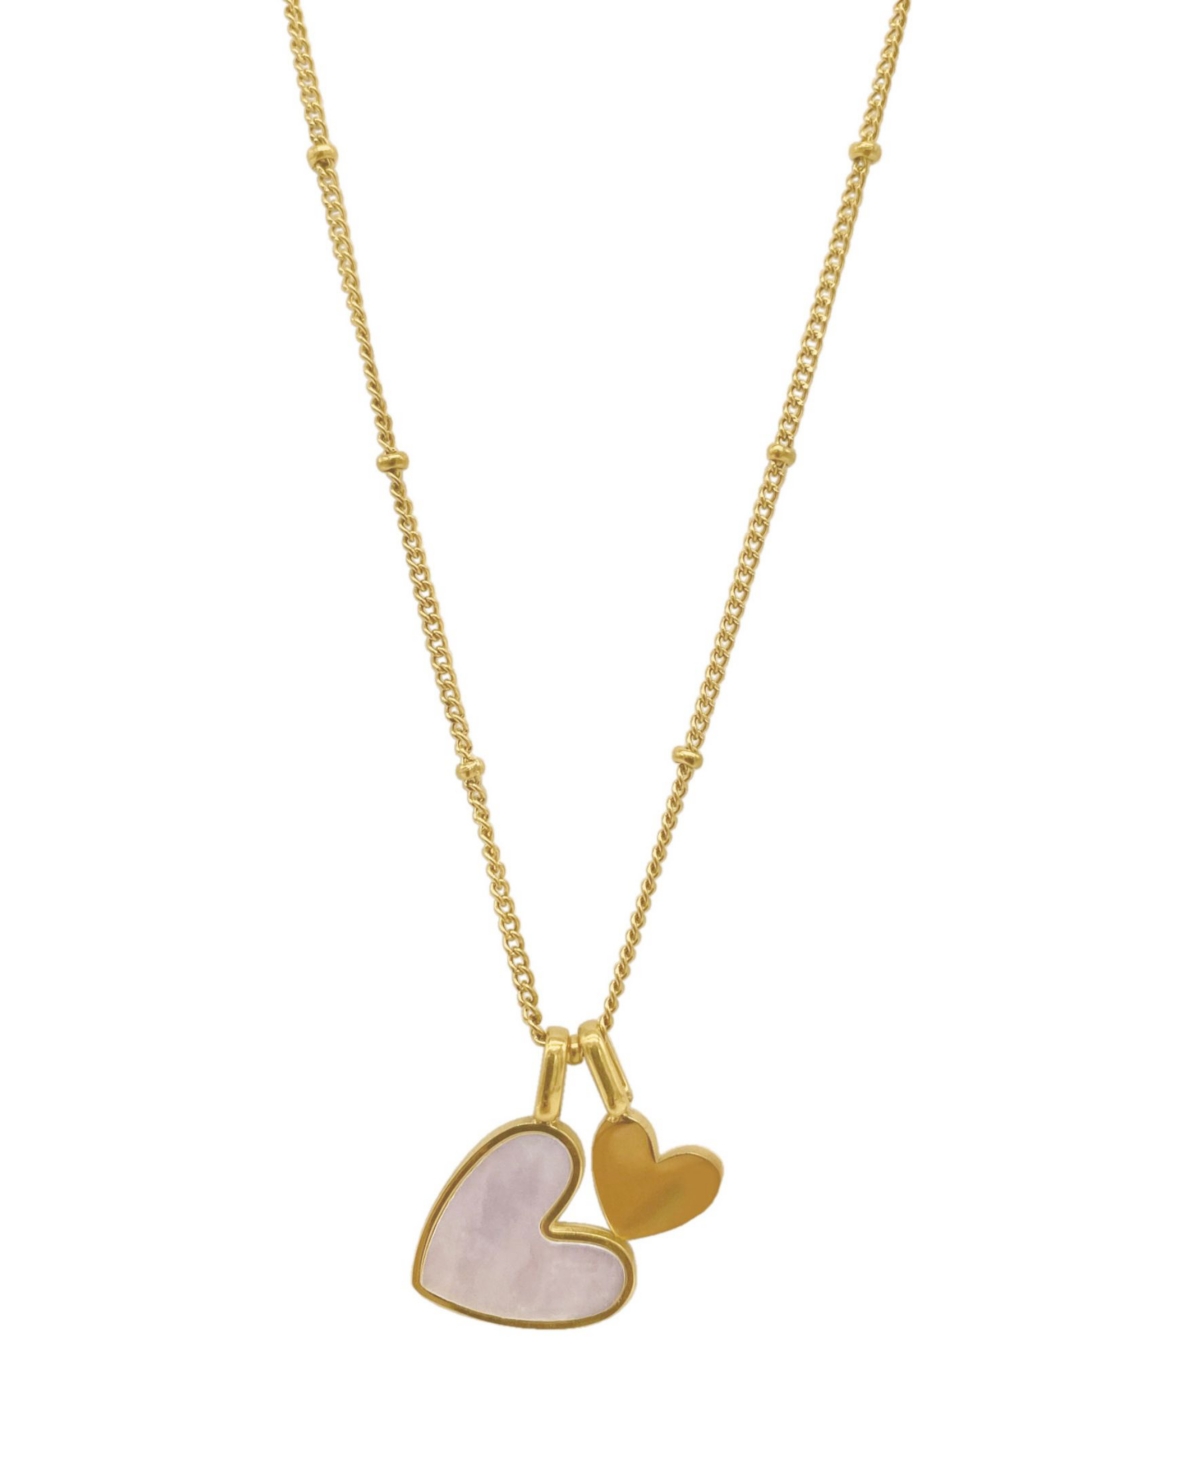 18-20" Adjustable 14K Gold Plated Imitation Mother of Pearl Heart Charms Necklace - White